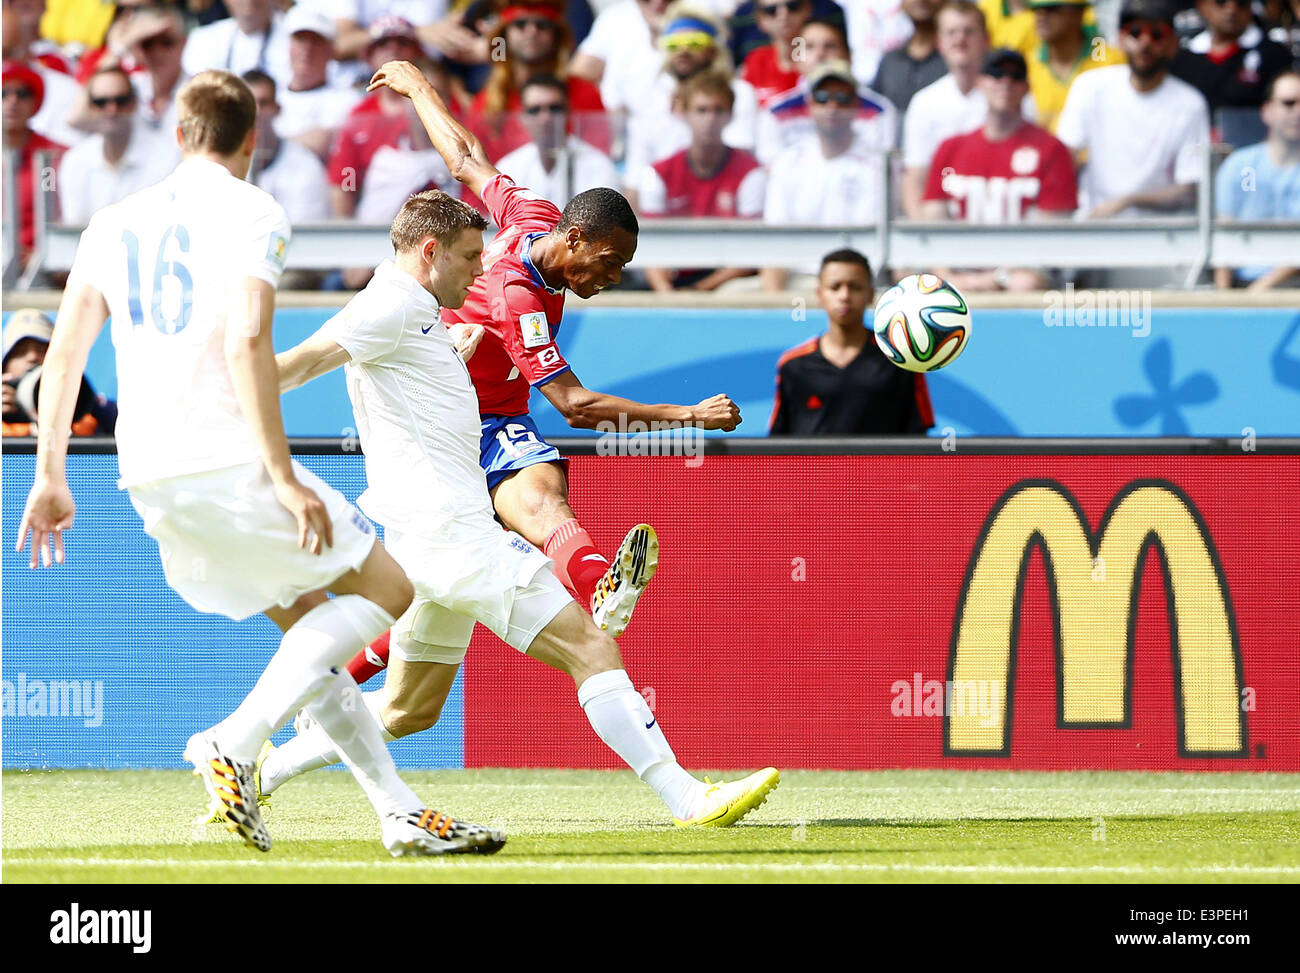 Belo Horizonte, Brazil. 24th June, 2014. Costa Rica's Roy Miller (R) shoots the ball during a Group D match between Costa Rica and England of 2014 FIFA World Cup at the Estadio Mineirao Stadium in Belo Horizonte, Brazil, on June 24, 2014. © Liu Bin/Xinhua/Alamy Live News Stock Photo